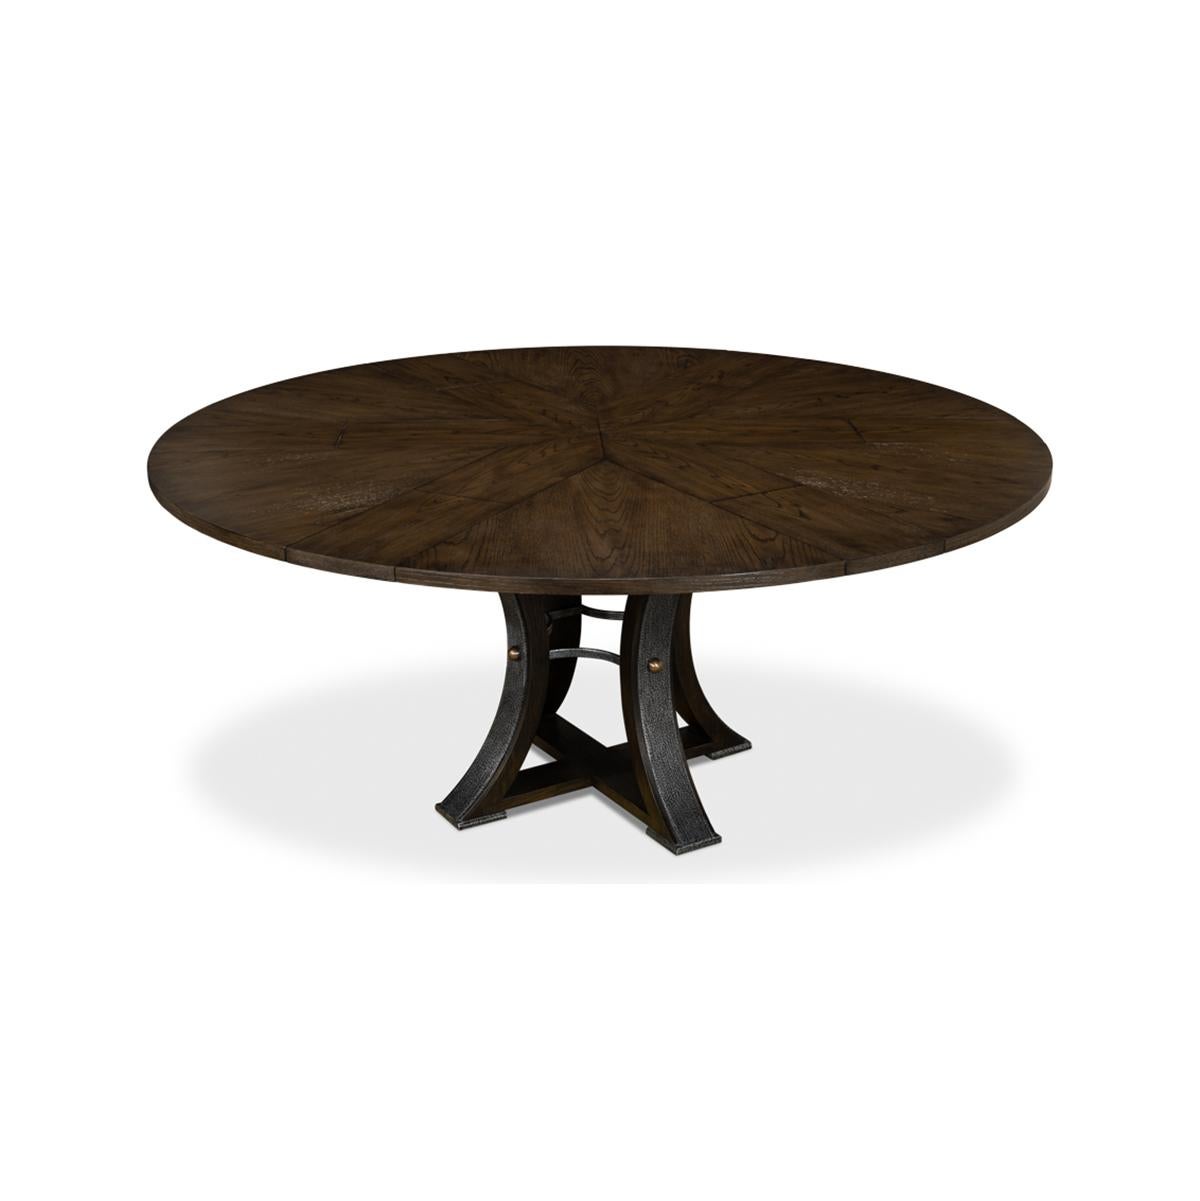 Wood Modern Industrial Dining Table - 70